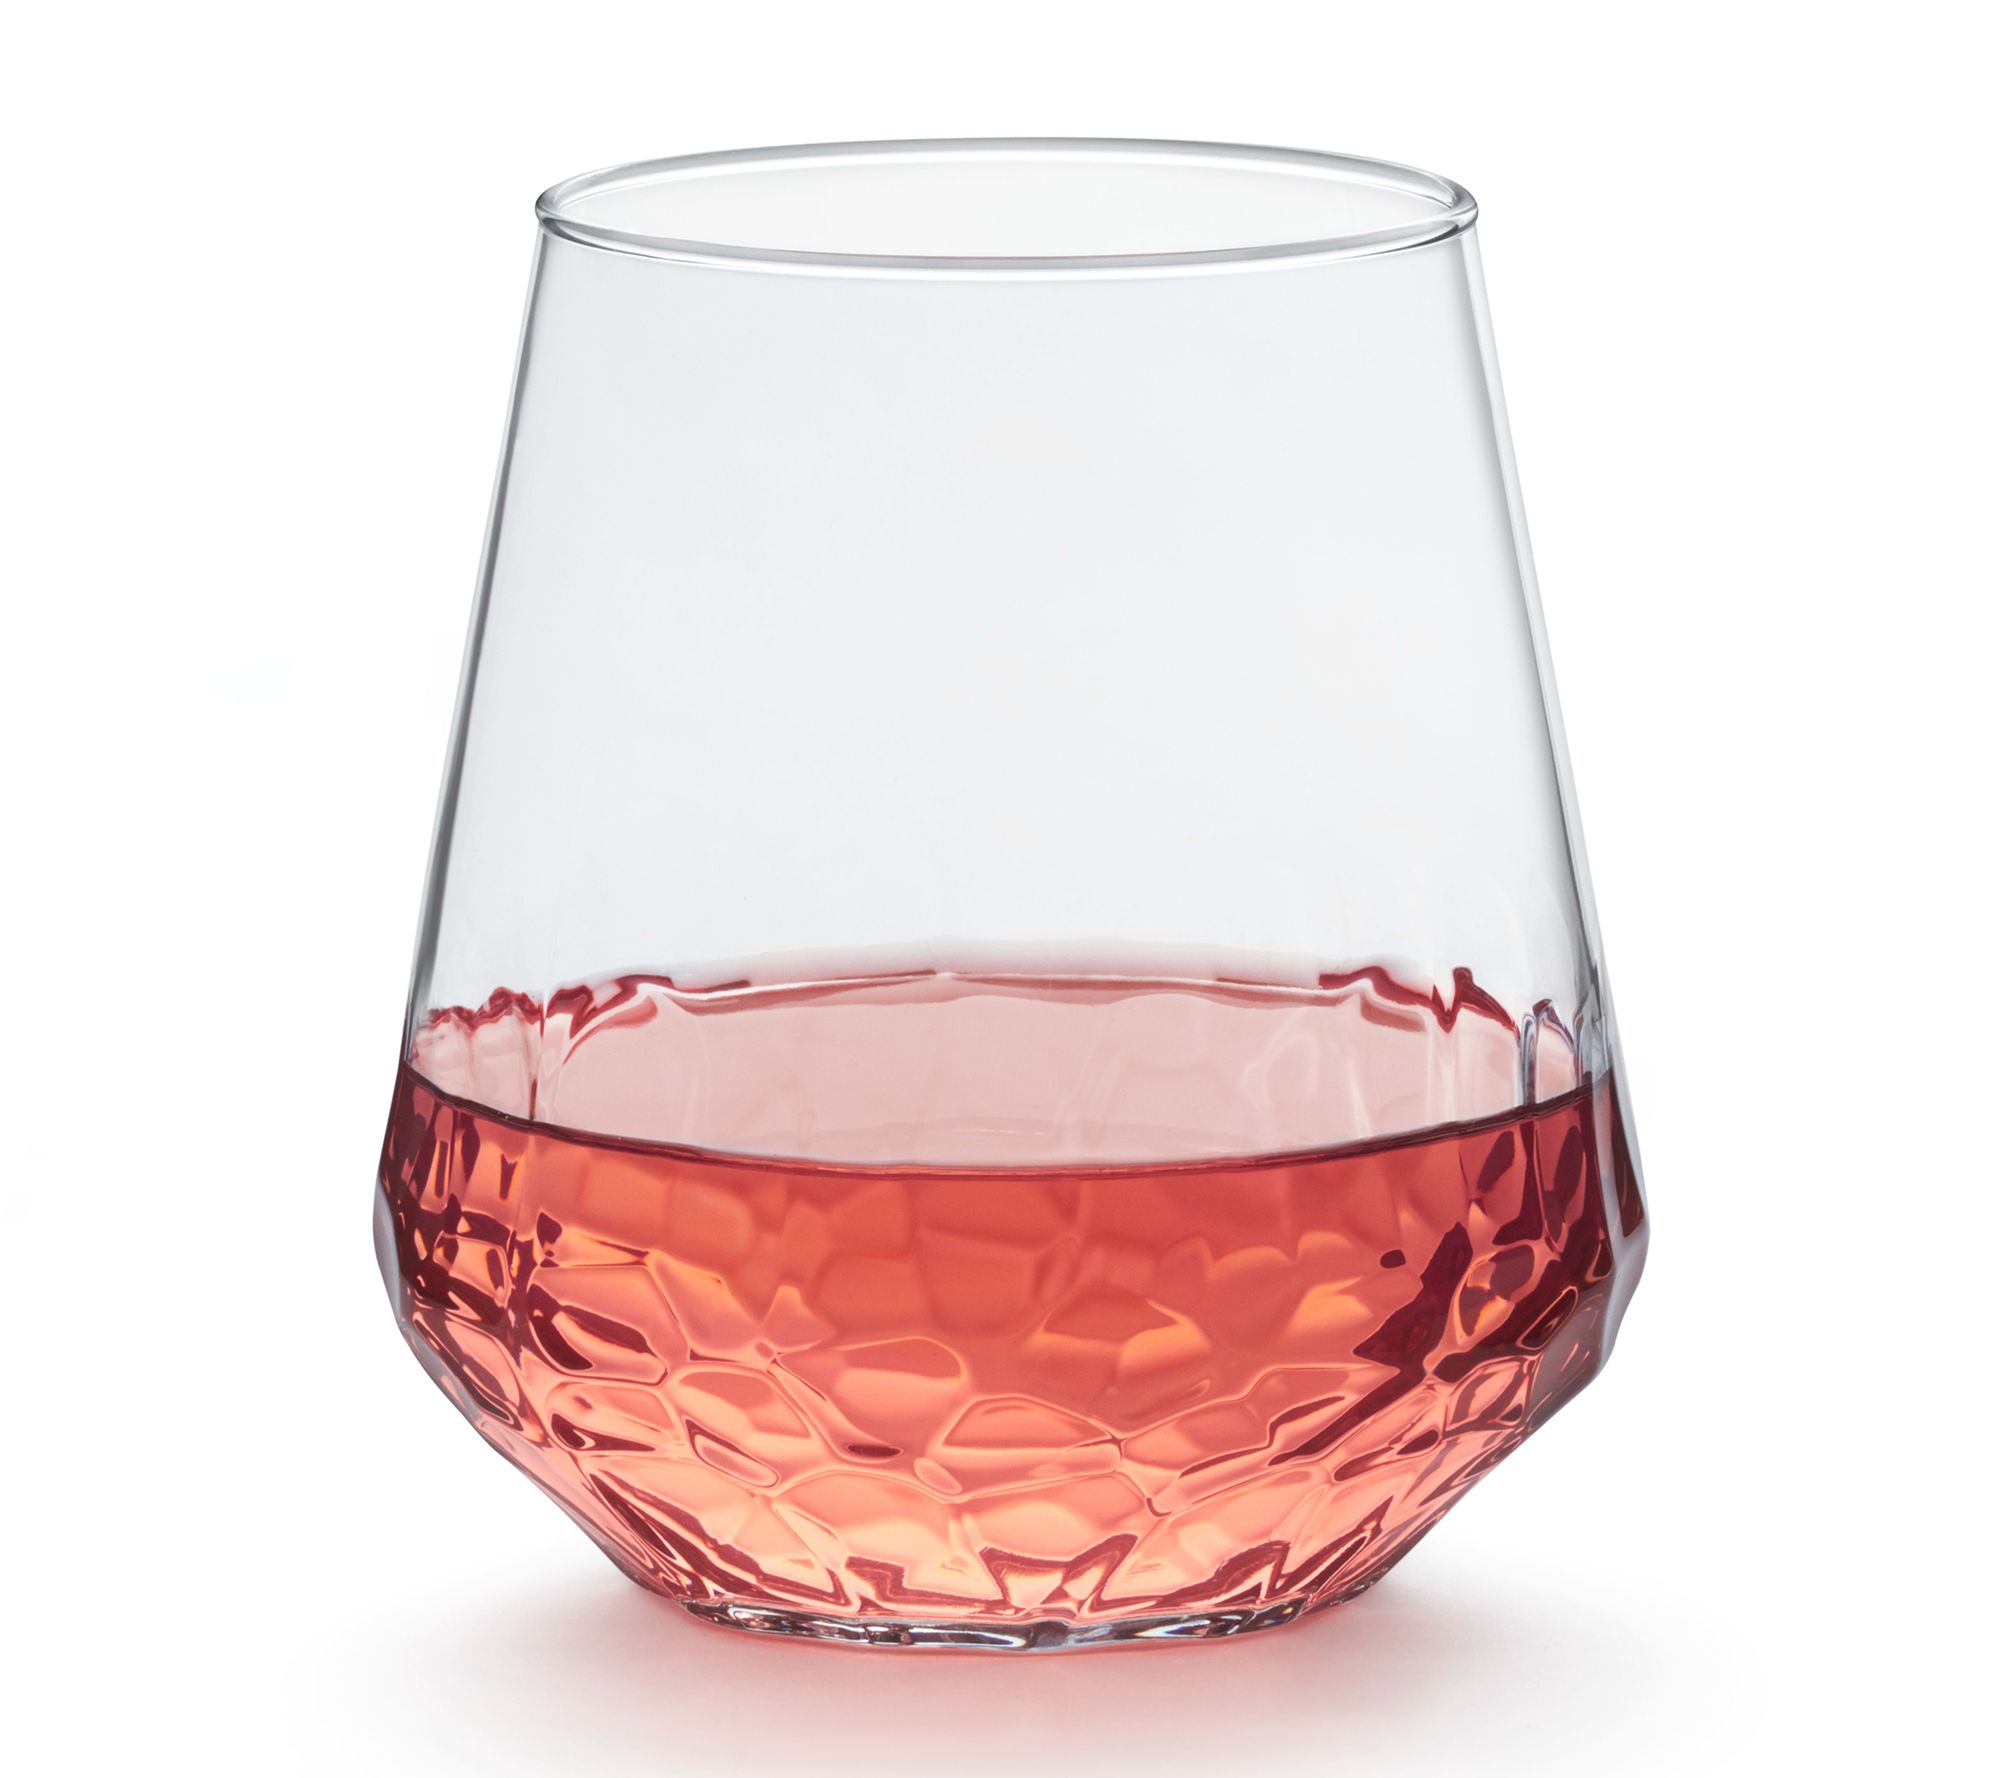 Libbey Signature Greenwich Stemless Wine Gift Set of 4, 18-Ounce